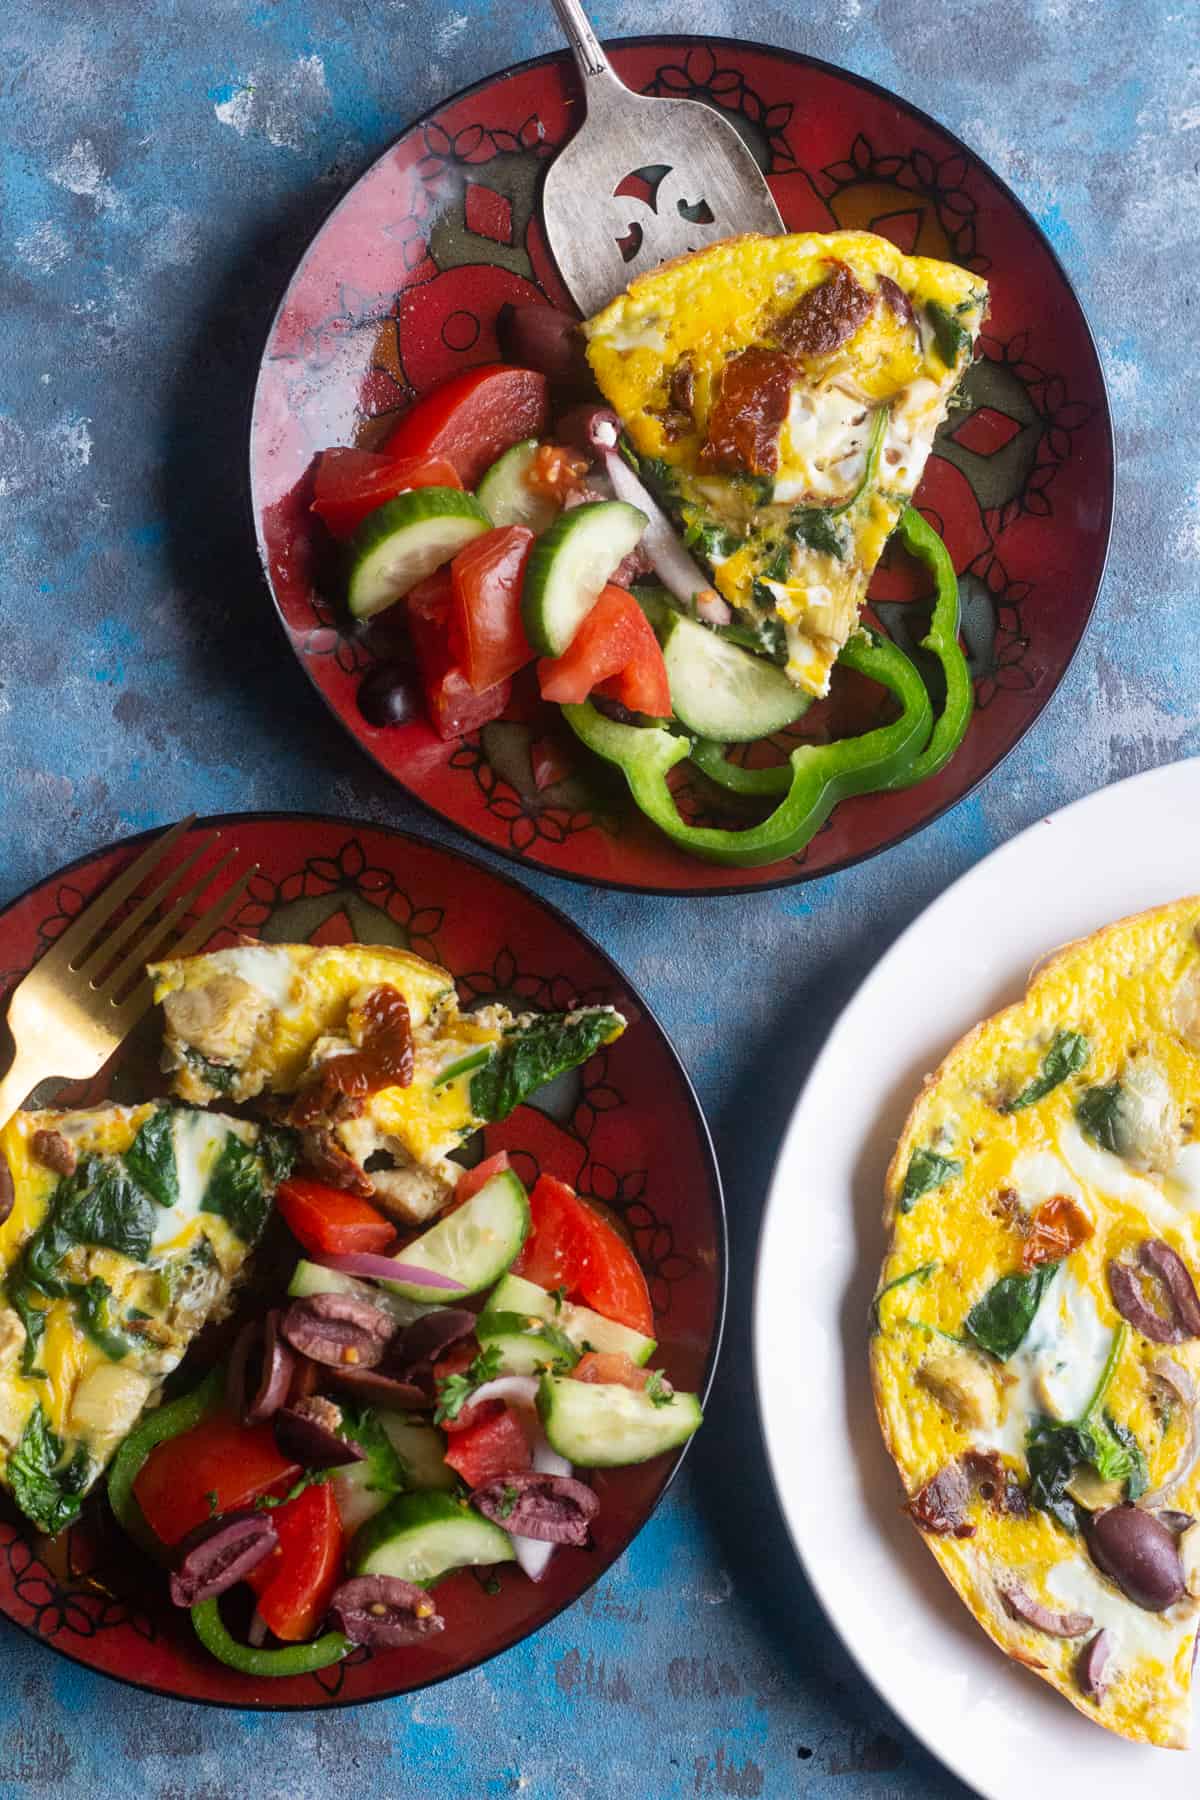 Spinach tomato omelette: Use ½ cup chopped fresh tomatoes instead of sun dried tomatoes.
